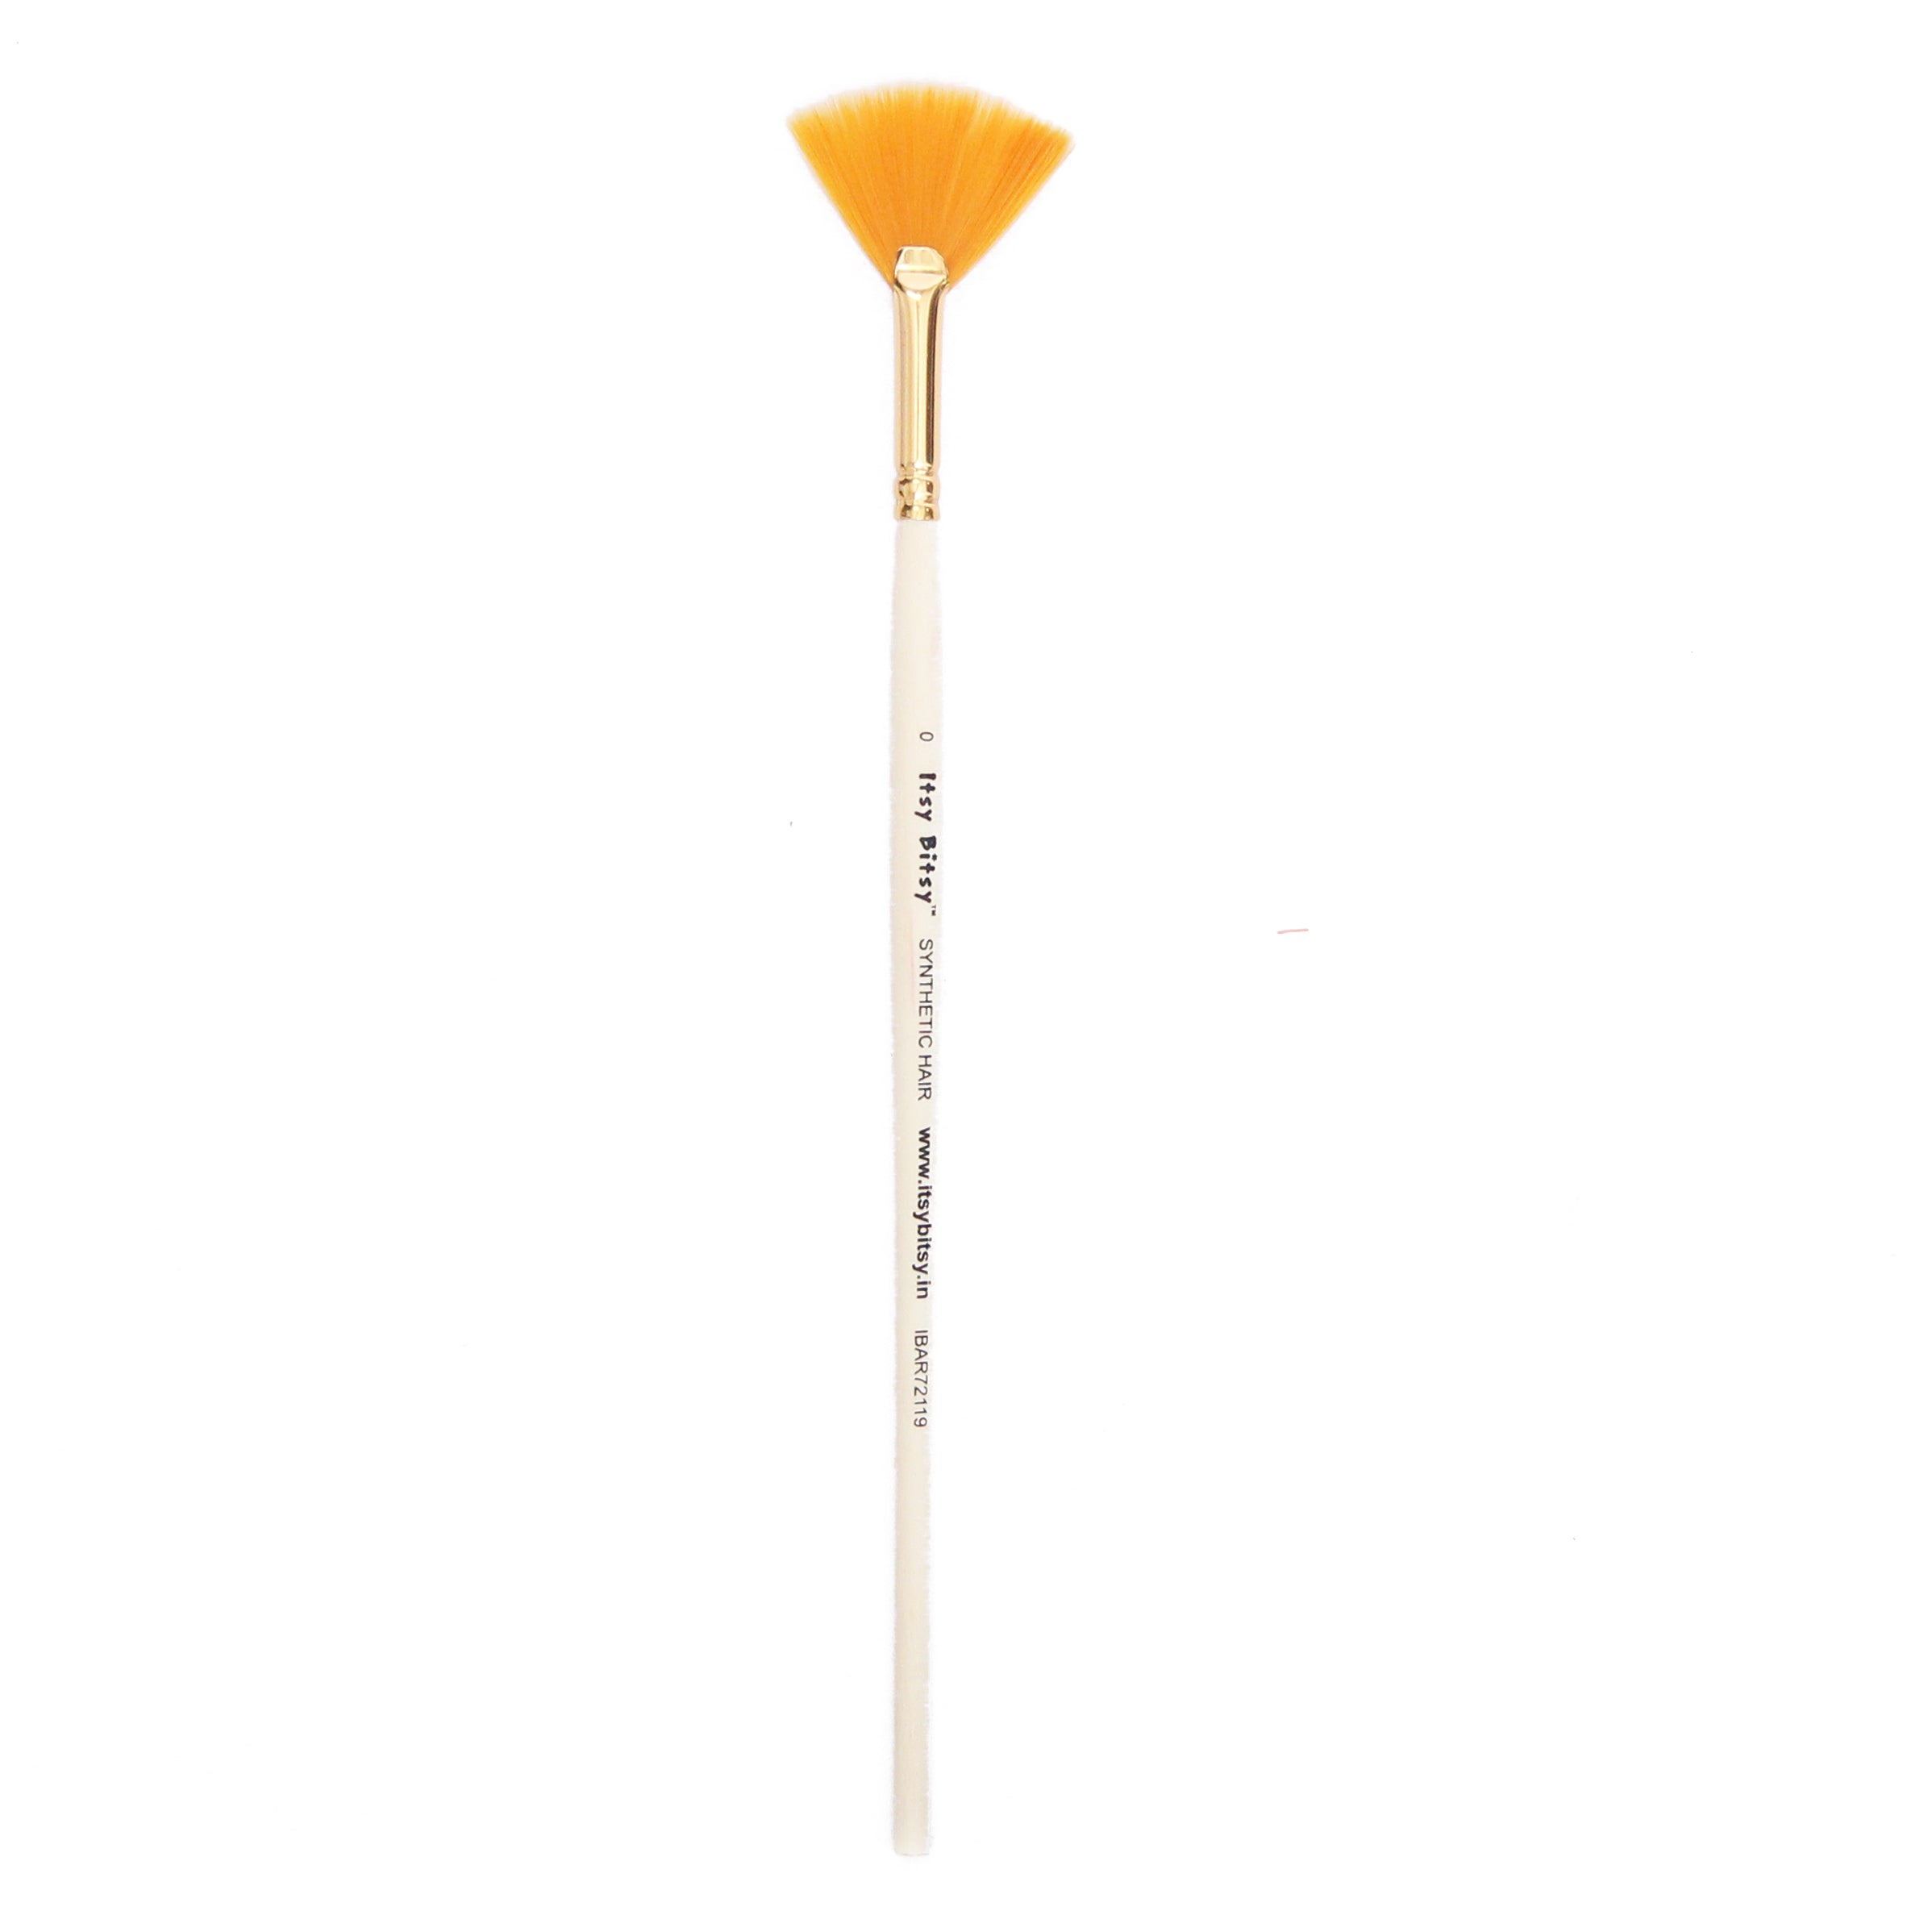 Synthetic Hair Fan Brush Size- 0 Golds